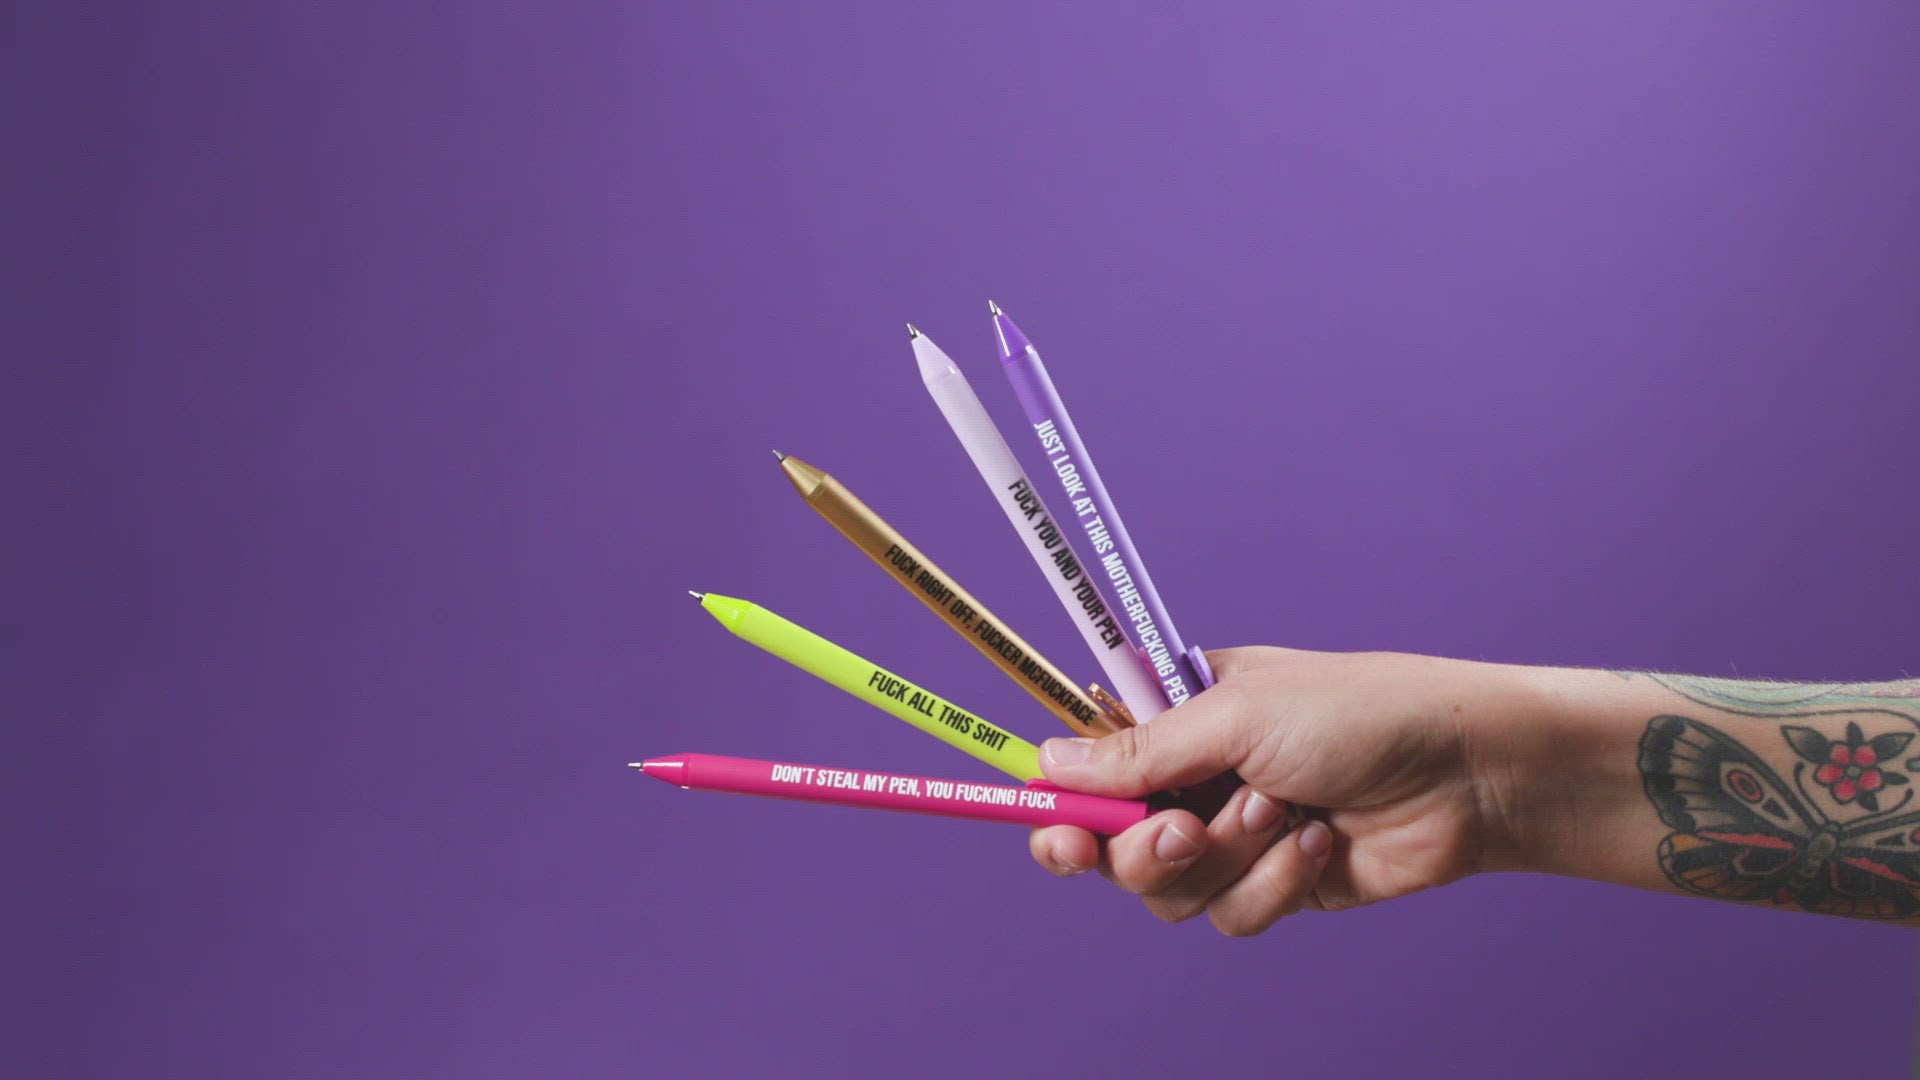 Wholesale Colorful Sweary Fuck Pens Cussing Pen Gift Set - 5 Gel Pens for  your store - Faire